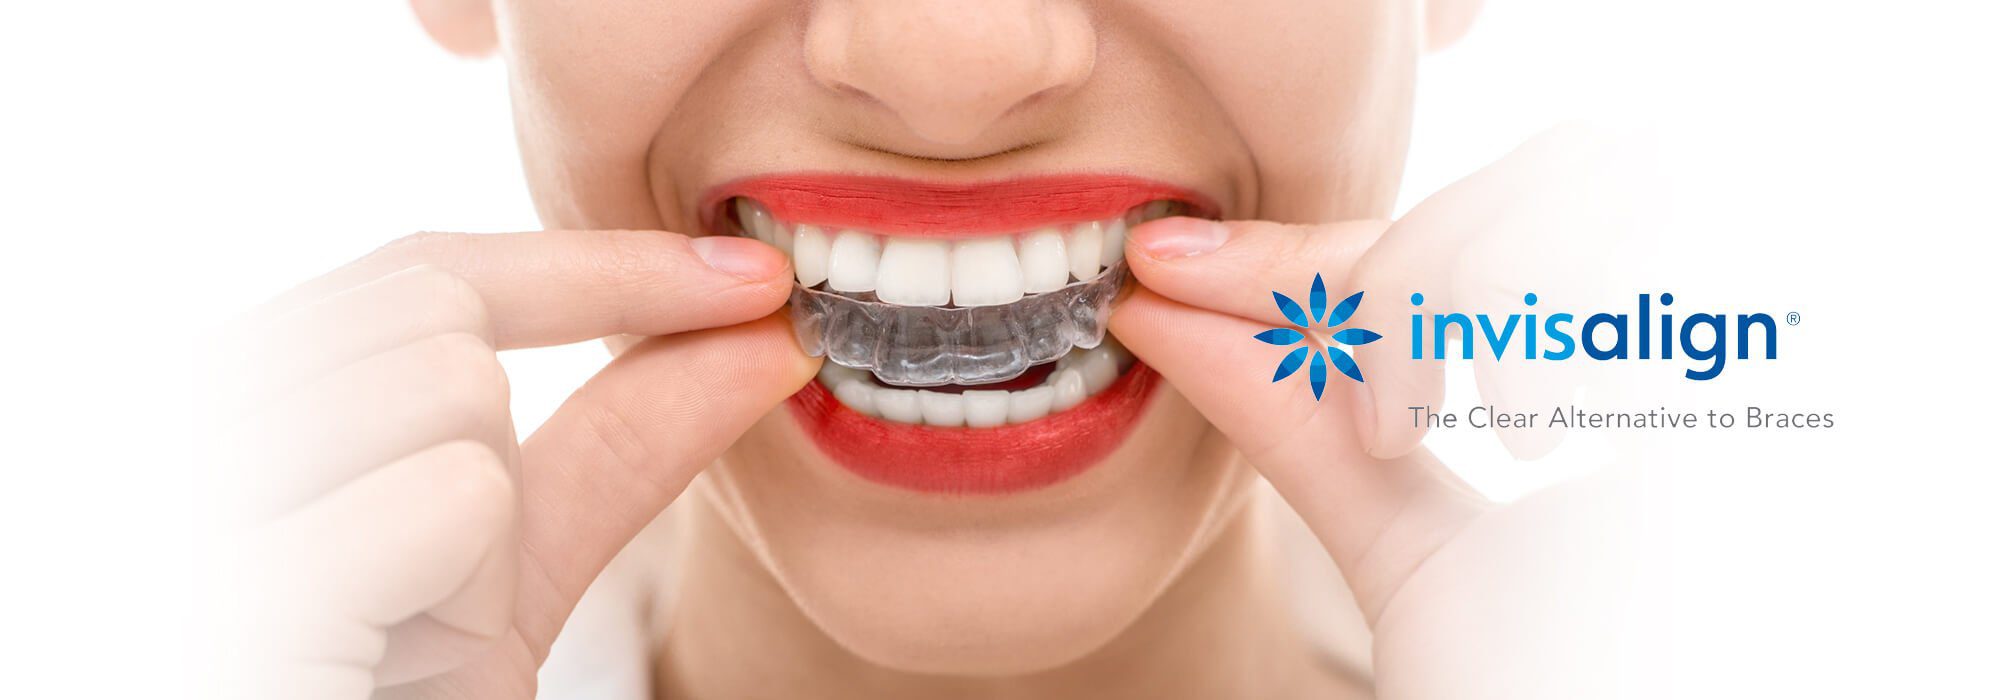 Metal Braces Work Faster Than Clear Aligners: Find Out Here!